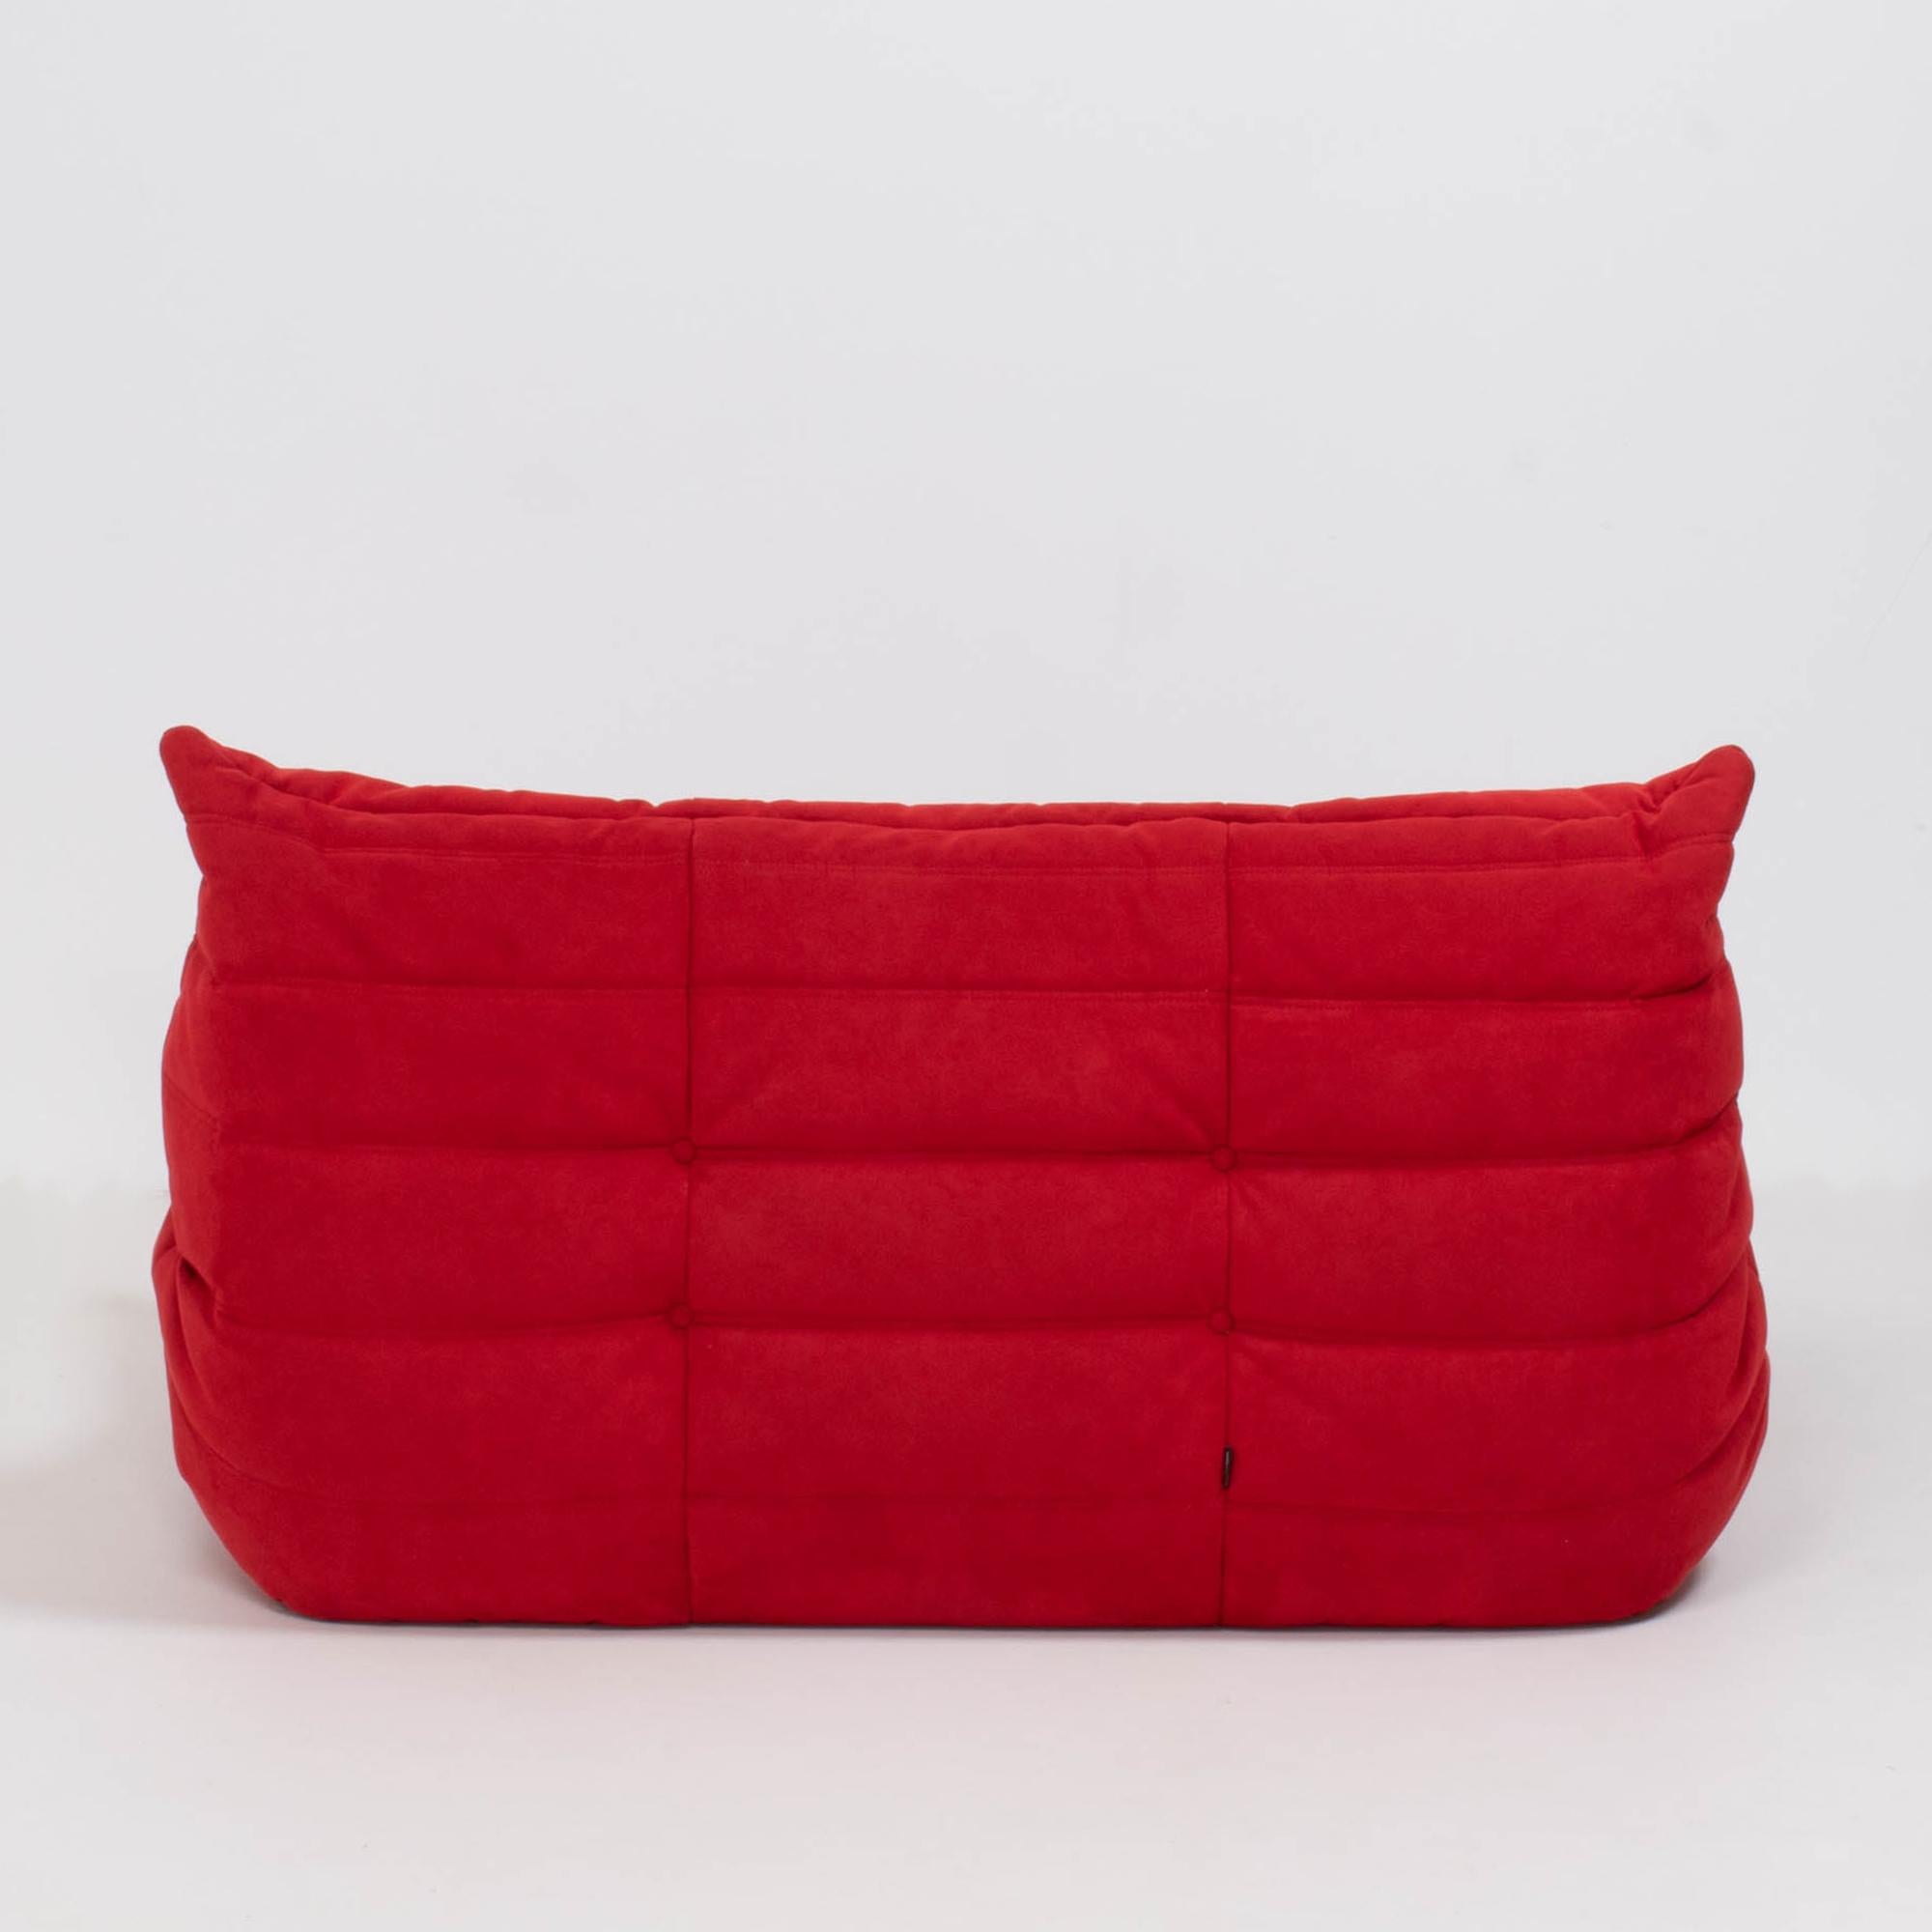 Late 20th Century Ligne Roset by Michel Ducaroy Togo Red Modular Sofas and Footstool, Set of 3